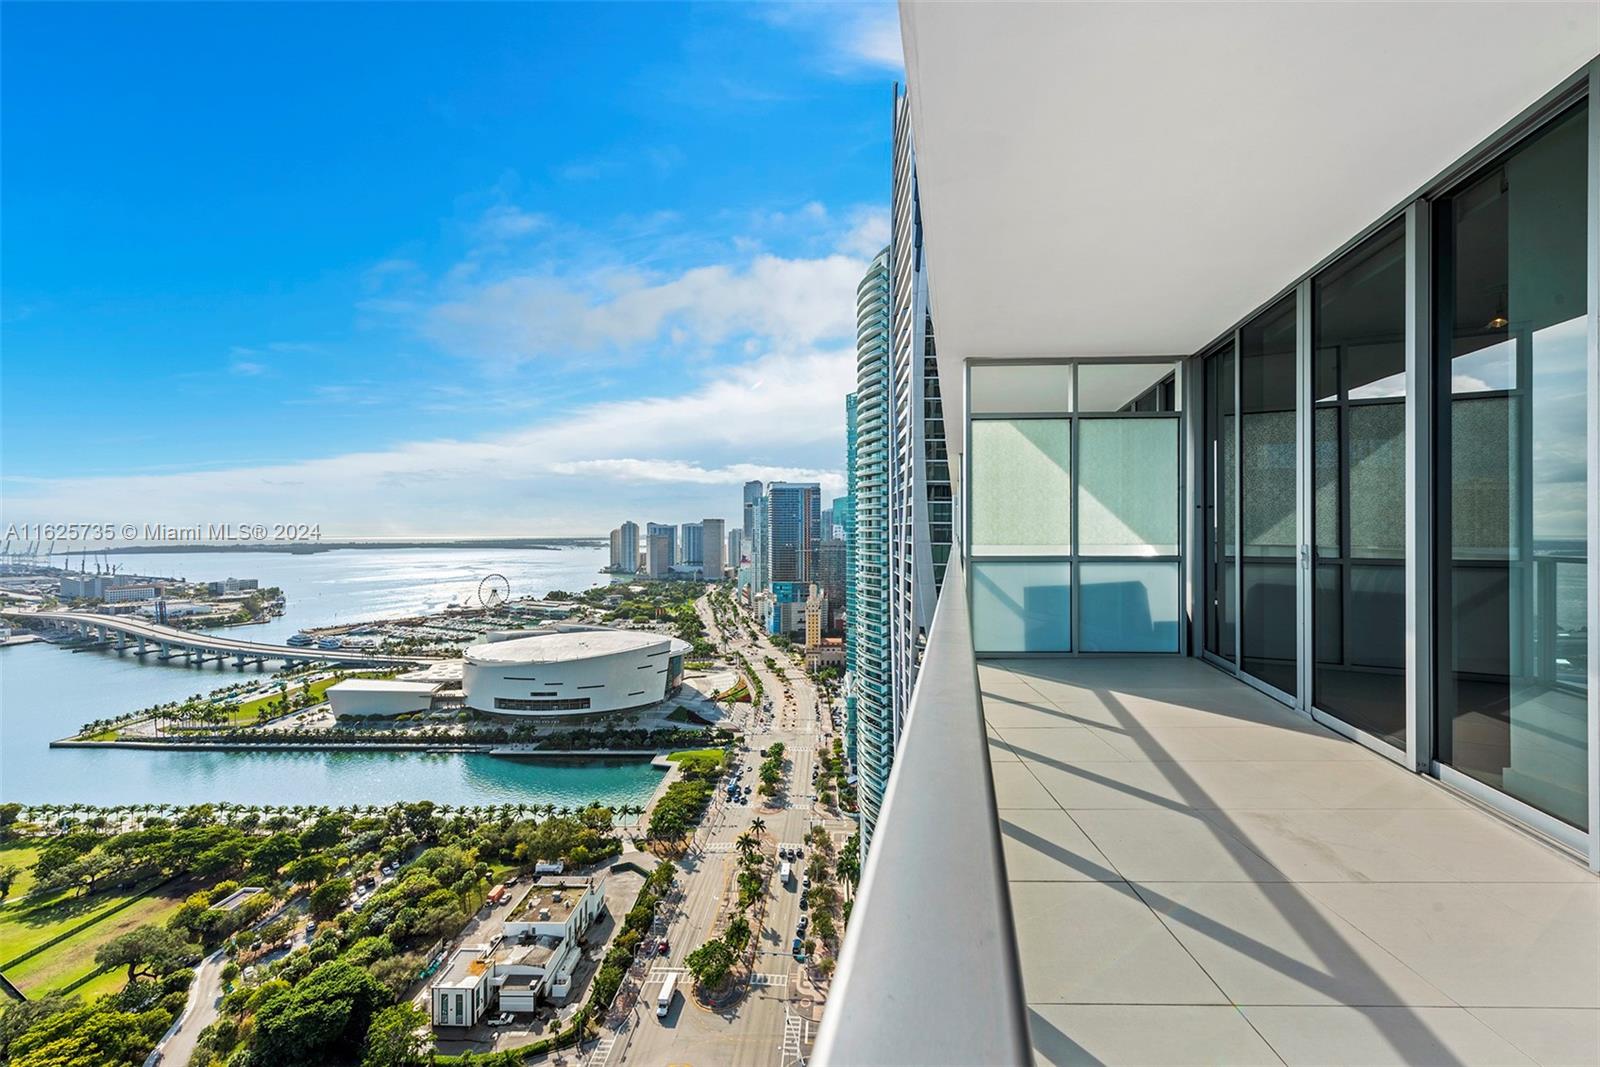 Direct Biscayne Bay & Miami Beach views from this REMODELED bright & spacious 2 Bed, 2.5 Bath Residence at Marquis. Available starting 9/6/24. This high floor, flow-through residence features 1,477sf of living space w/private elevator landing. Refinished & remodeled unit with brand new massive walk-in closets. Stunning sunrise views from master & living room and sunset views from Guest Bedroom. Open kitchen w/ Viking appliances, large laundry room with full-sized washer/dryer. High ceilings throughout. Building amenities & services include 24/7 concierge, security, & valet - swimming pool & lap pool, restaurant with delivery available, spa, fitness center, basketball & more. Minutes away from Design District, Wynwood, Brickell, Art Museum, & Arsht Center. 10 min to MIA Airport.